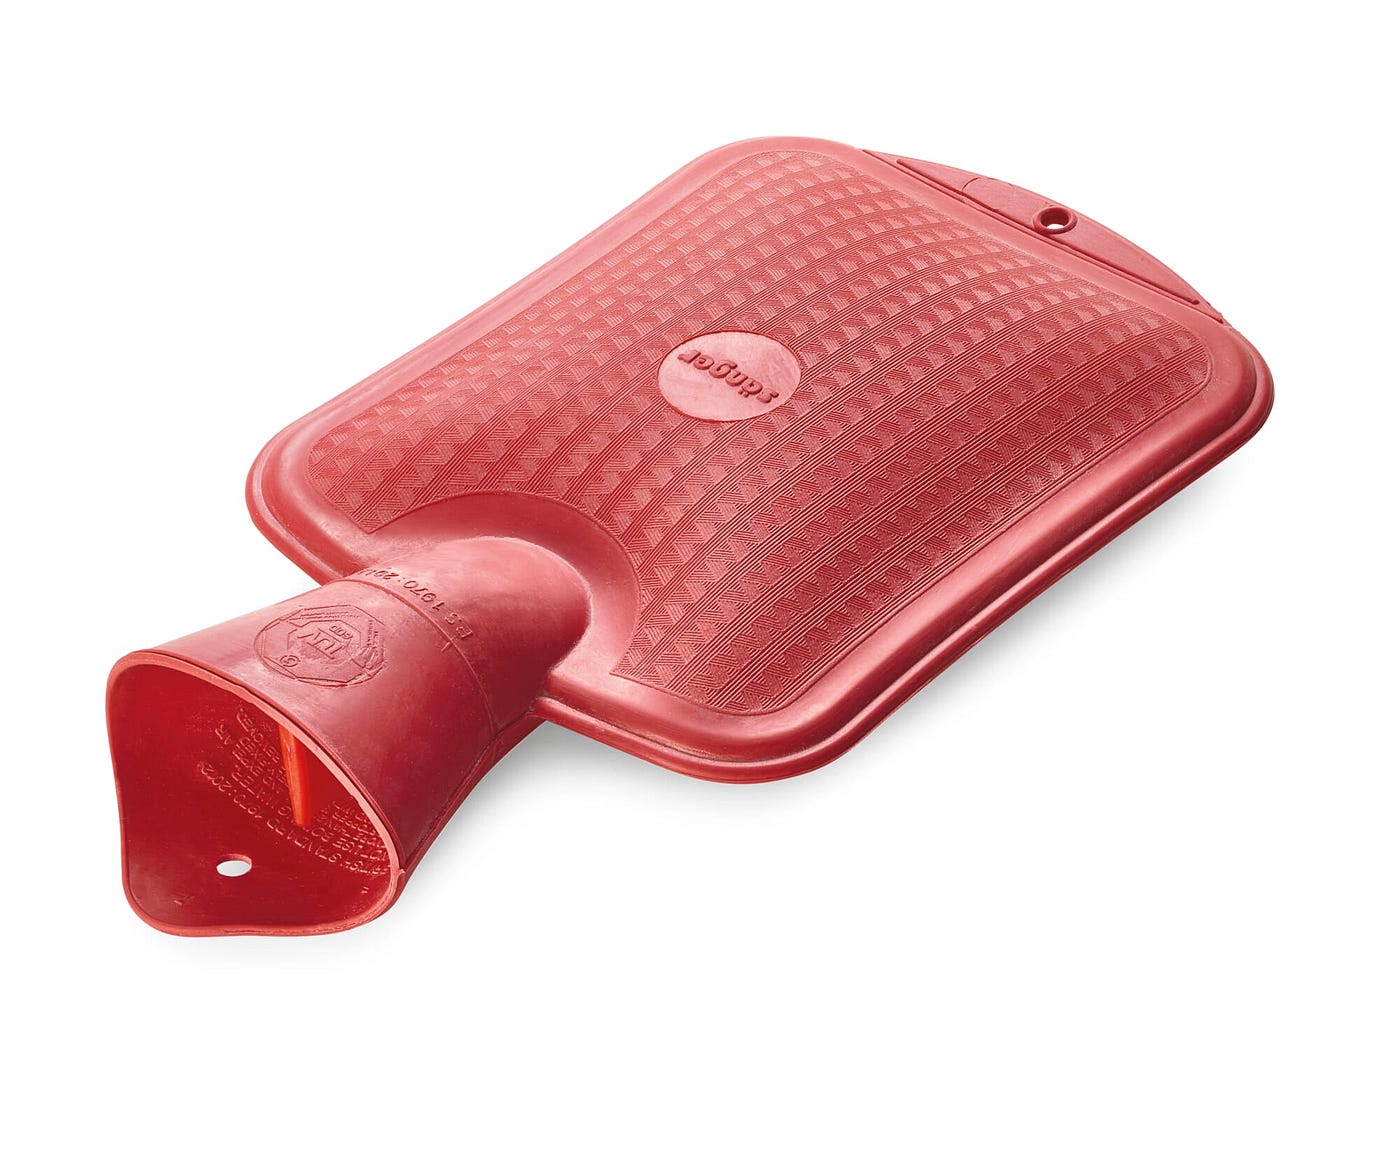 In Praise of the Hot-Water Bottle, by Clive Thompson